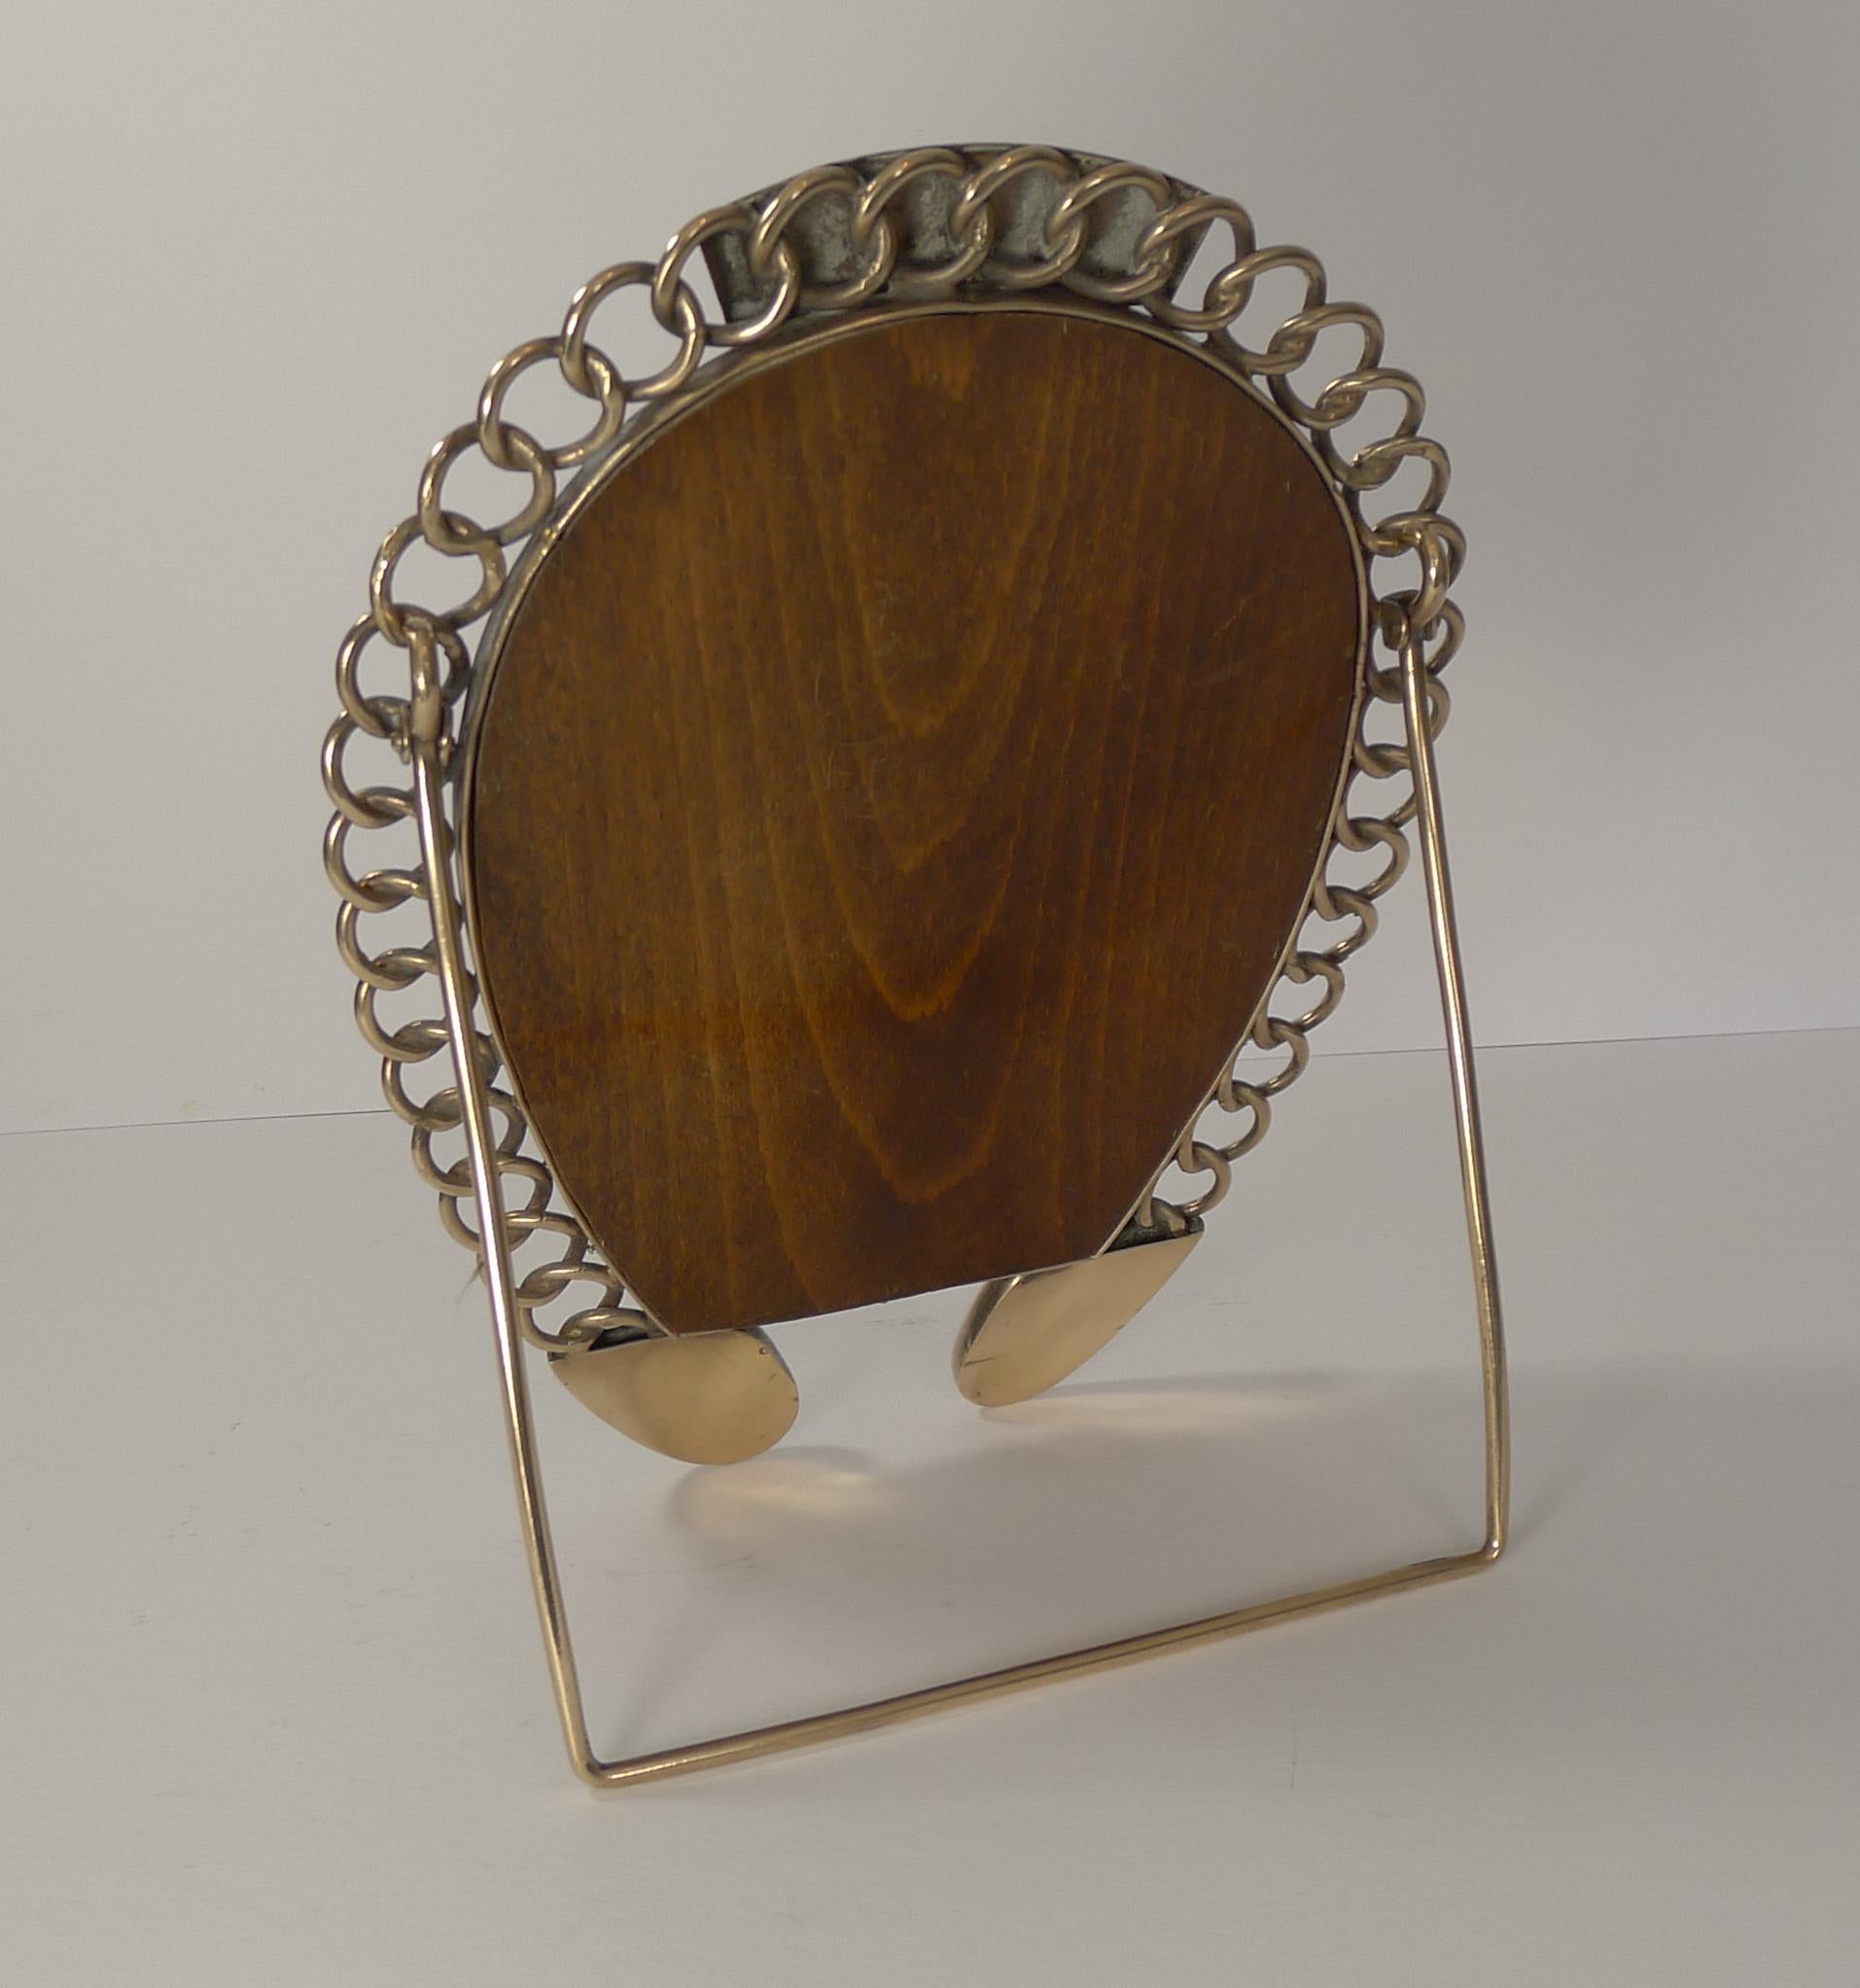 Late 19th Century Large Victorian Polished Brass Horseshoe Table Mirror, circa 1880